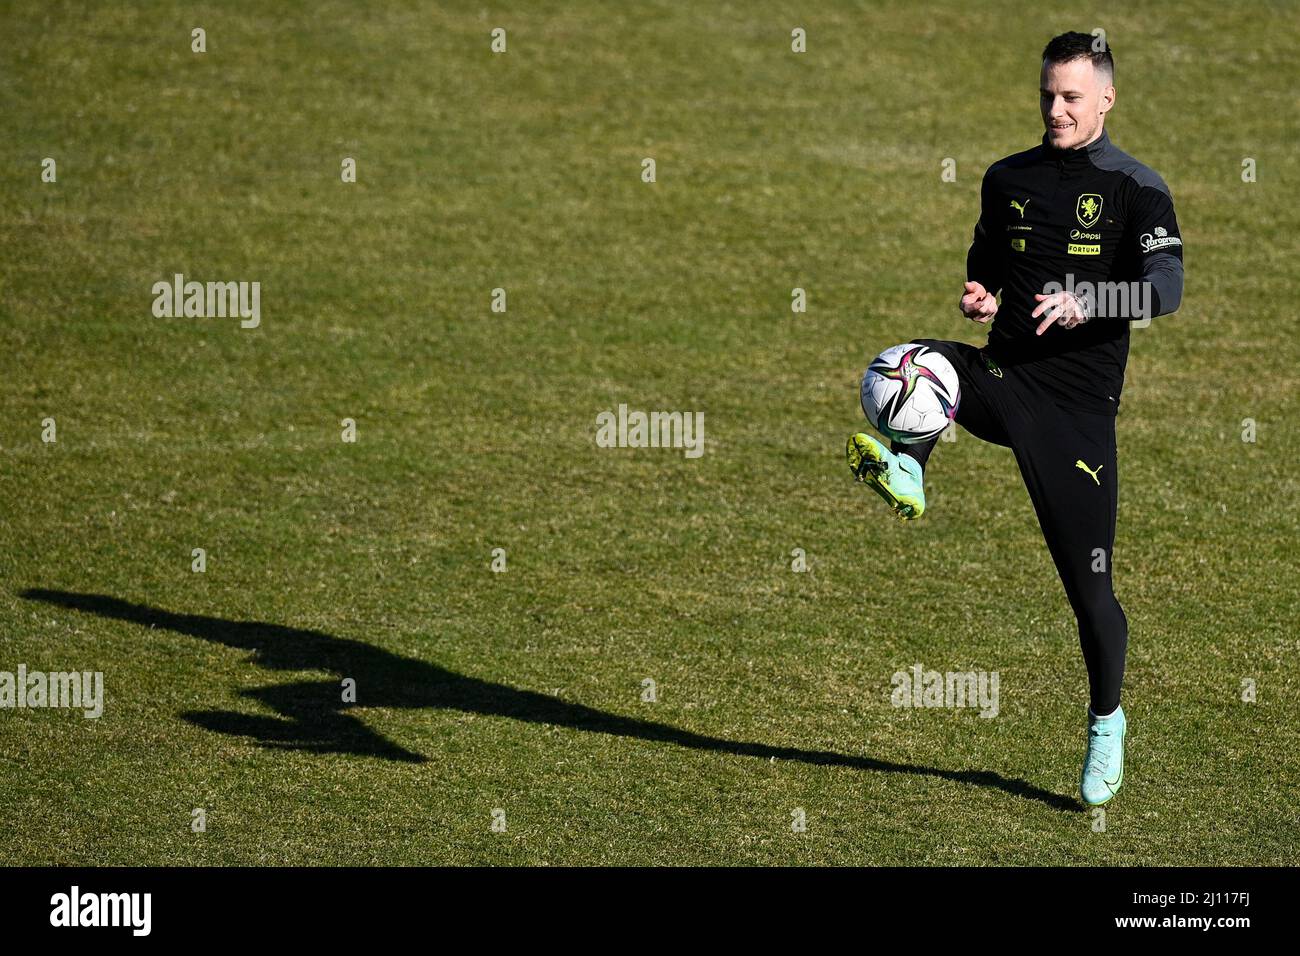 Prague, Czech Republic. 21st Mar, 2022. Czech Jan Sykora in action during the training session prior to the Czech national team vs Sweden play-off match of World Cup qualifier in Prague, Czech Republic, March 21, 2022. Credit: Ondrej Deml/CTK Photo/Alamy Live News Stock Photo